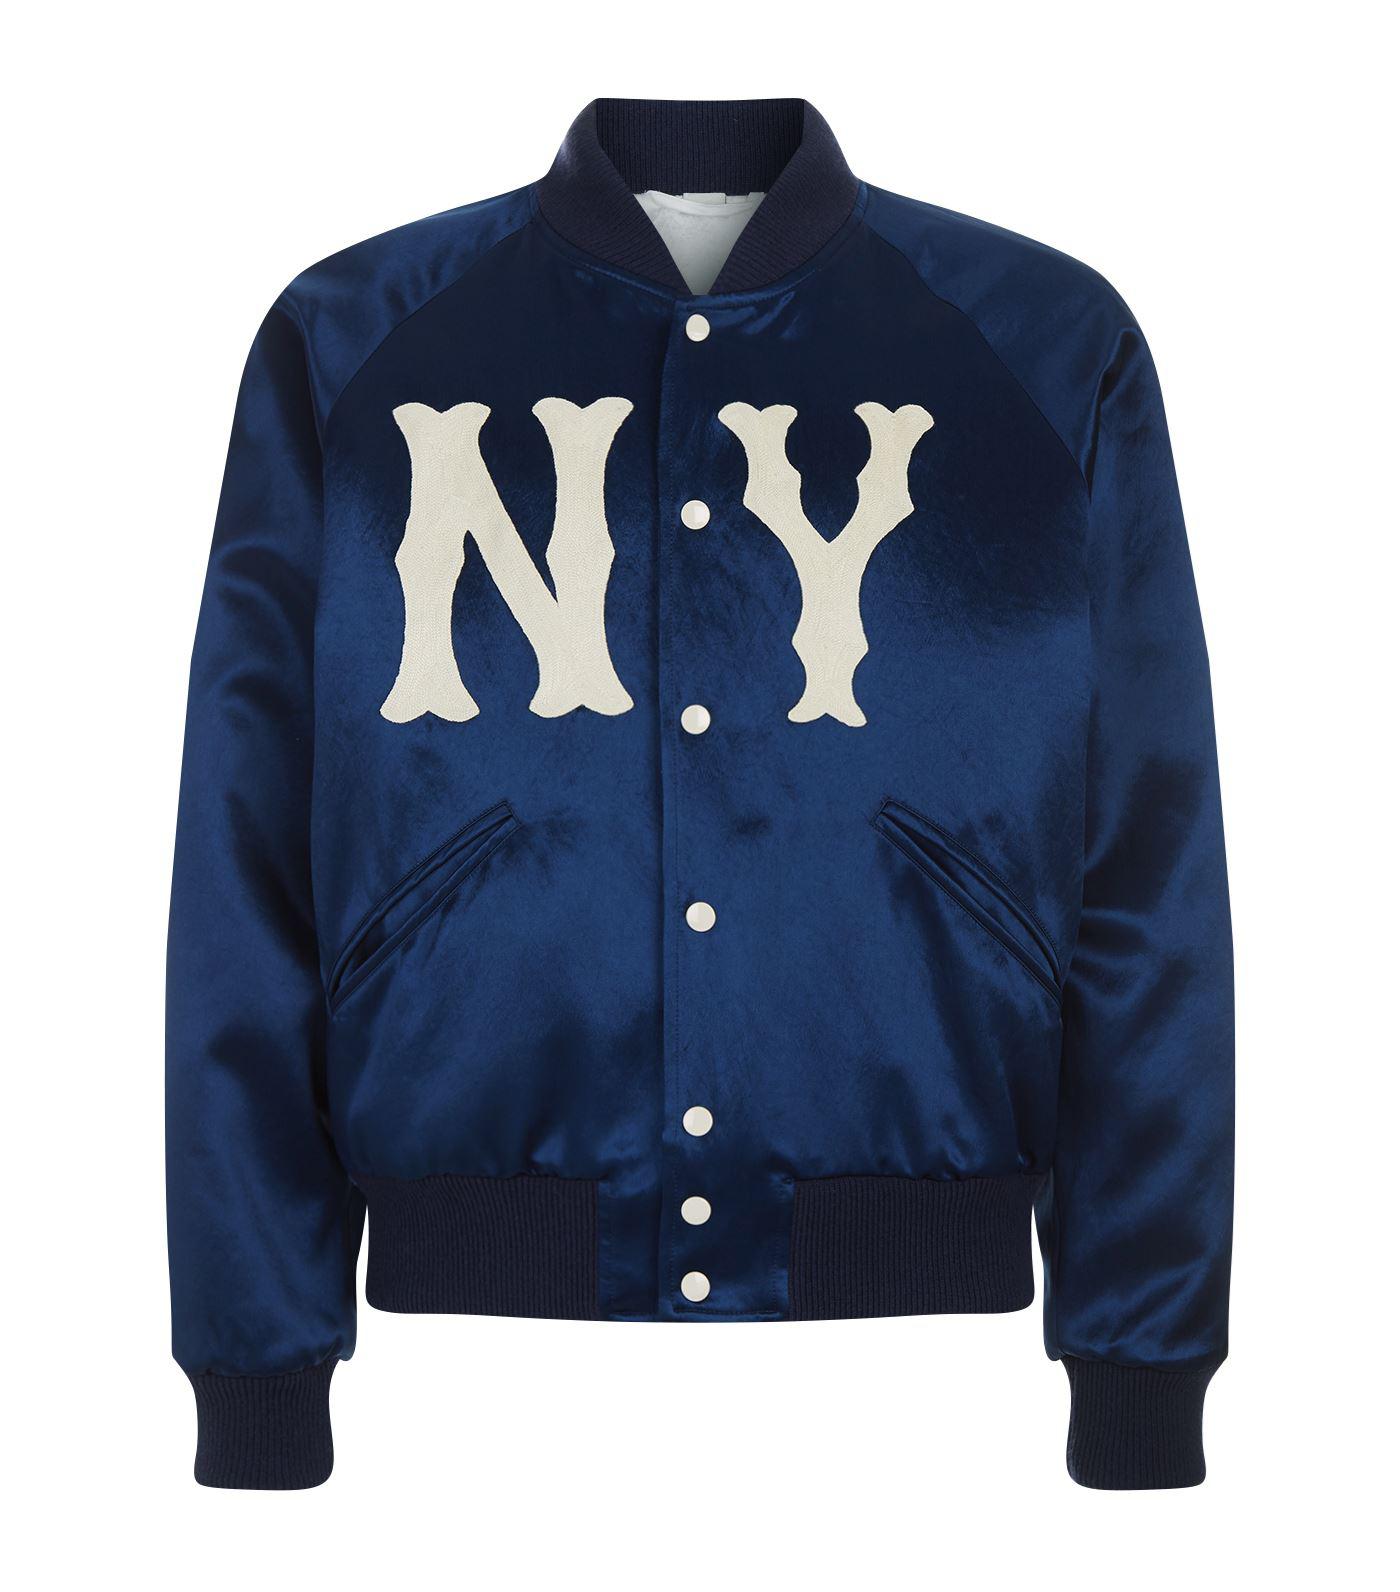 Gucci Ny Yankees Bomber Jacket in Blue for Men